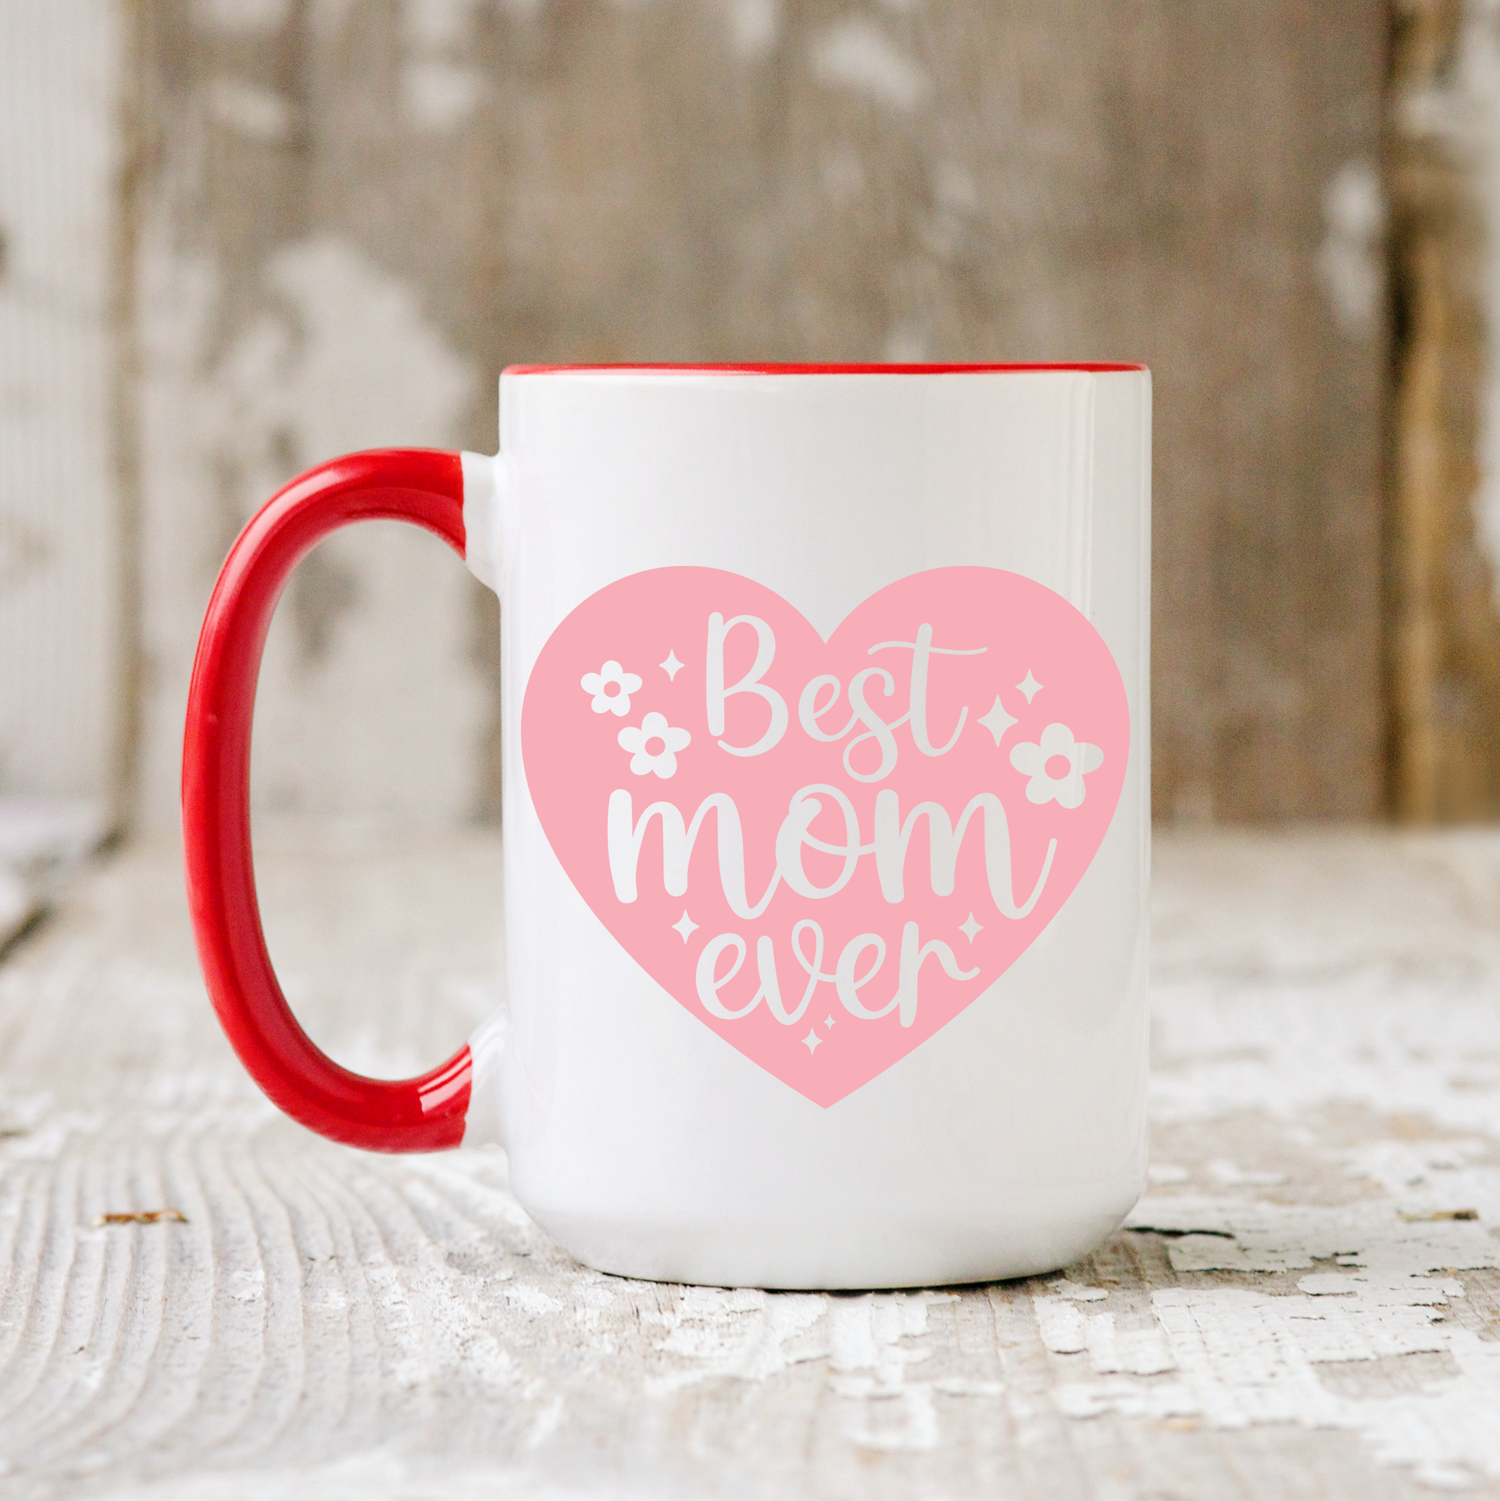 Cold Brew - Mug & Moment Coffee – Mom Life Must Haves